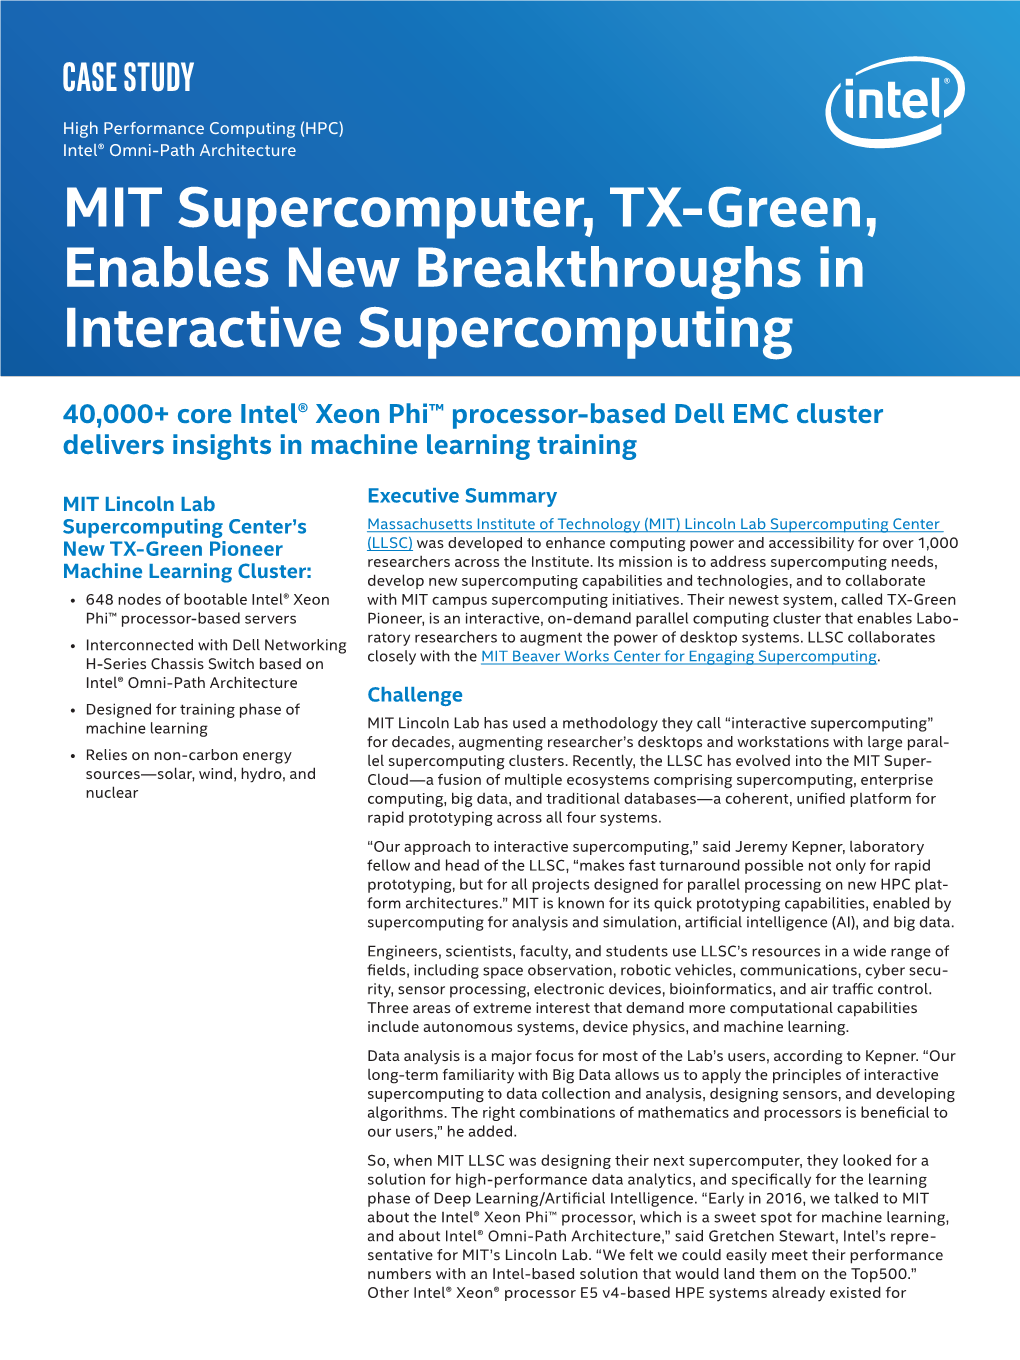 MIT Supercomputer, TX-Green, Enables New Breakthroughs in Interactive Supercomputing